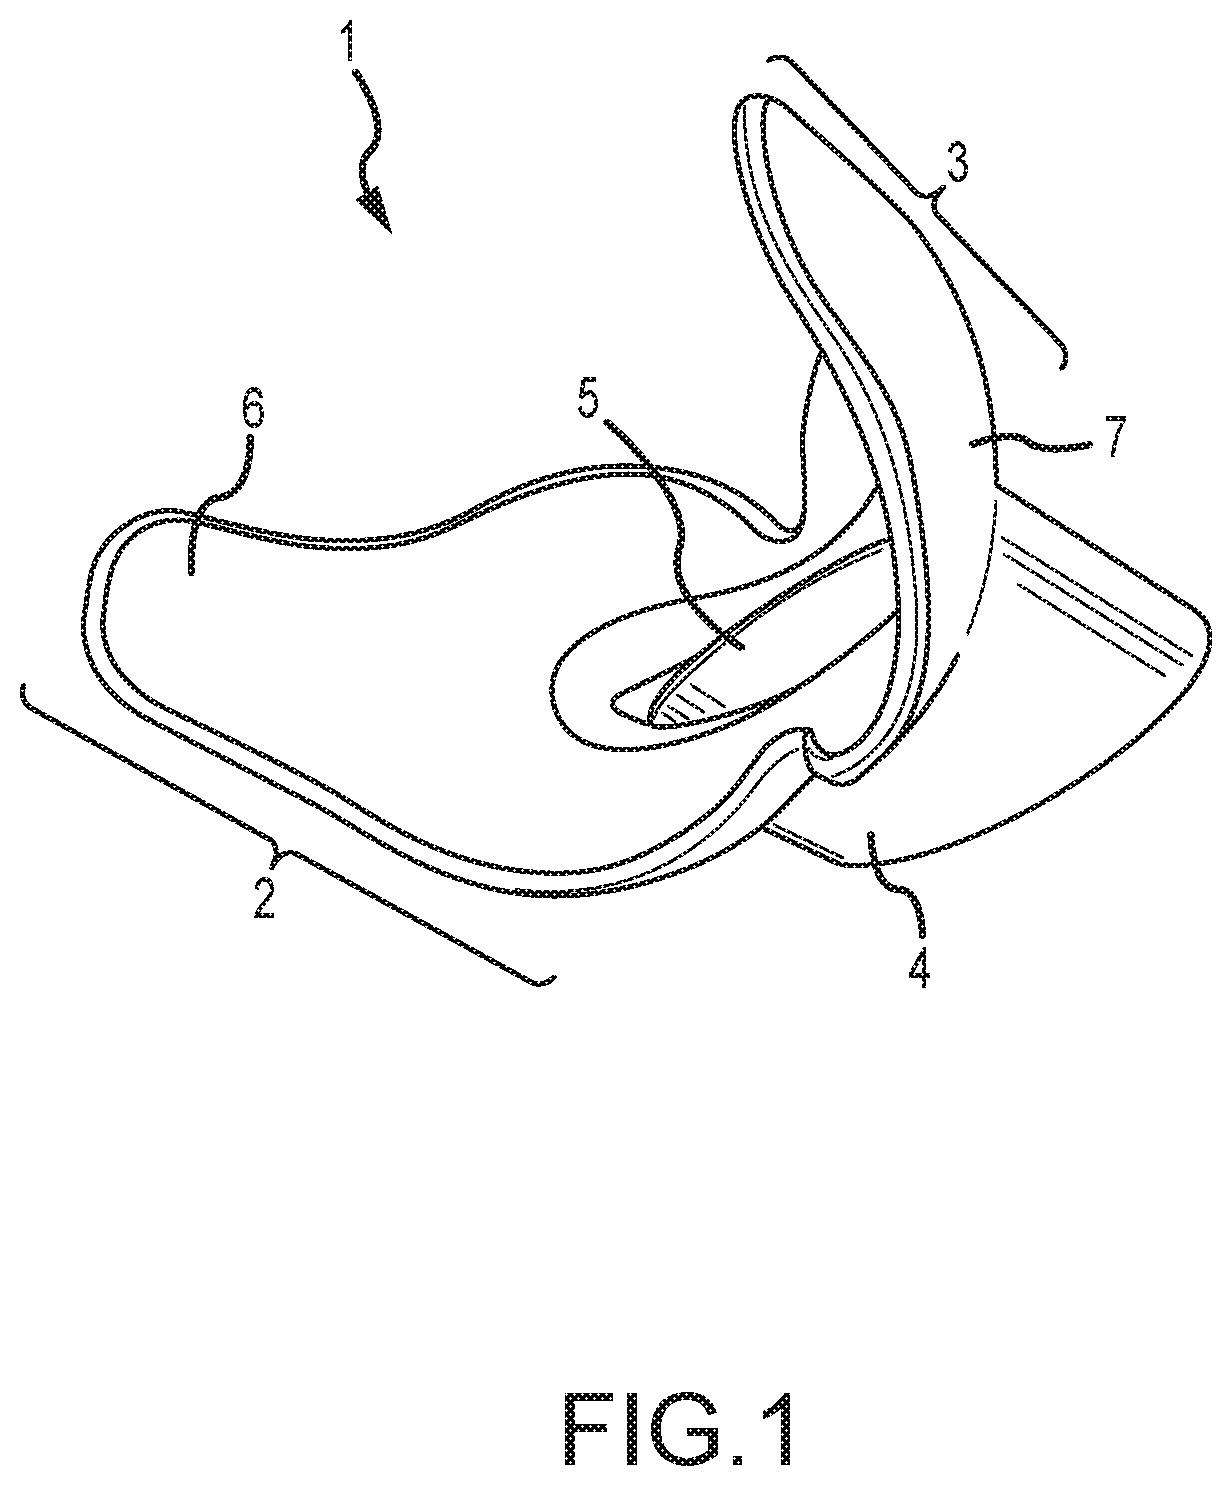 Oral and nasal devices for the treatment of sleep apnea and/or snoring with filter and sensors to provide remote digital monitoring and remote data analysis